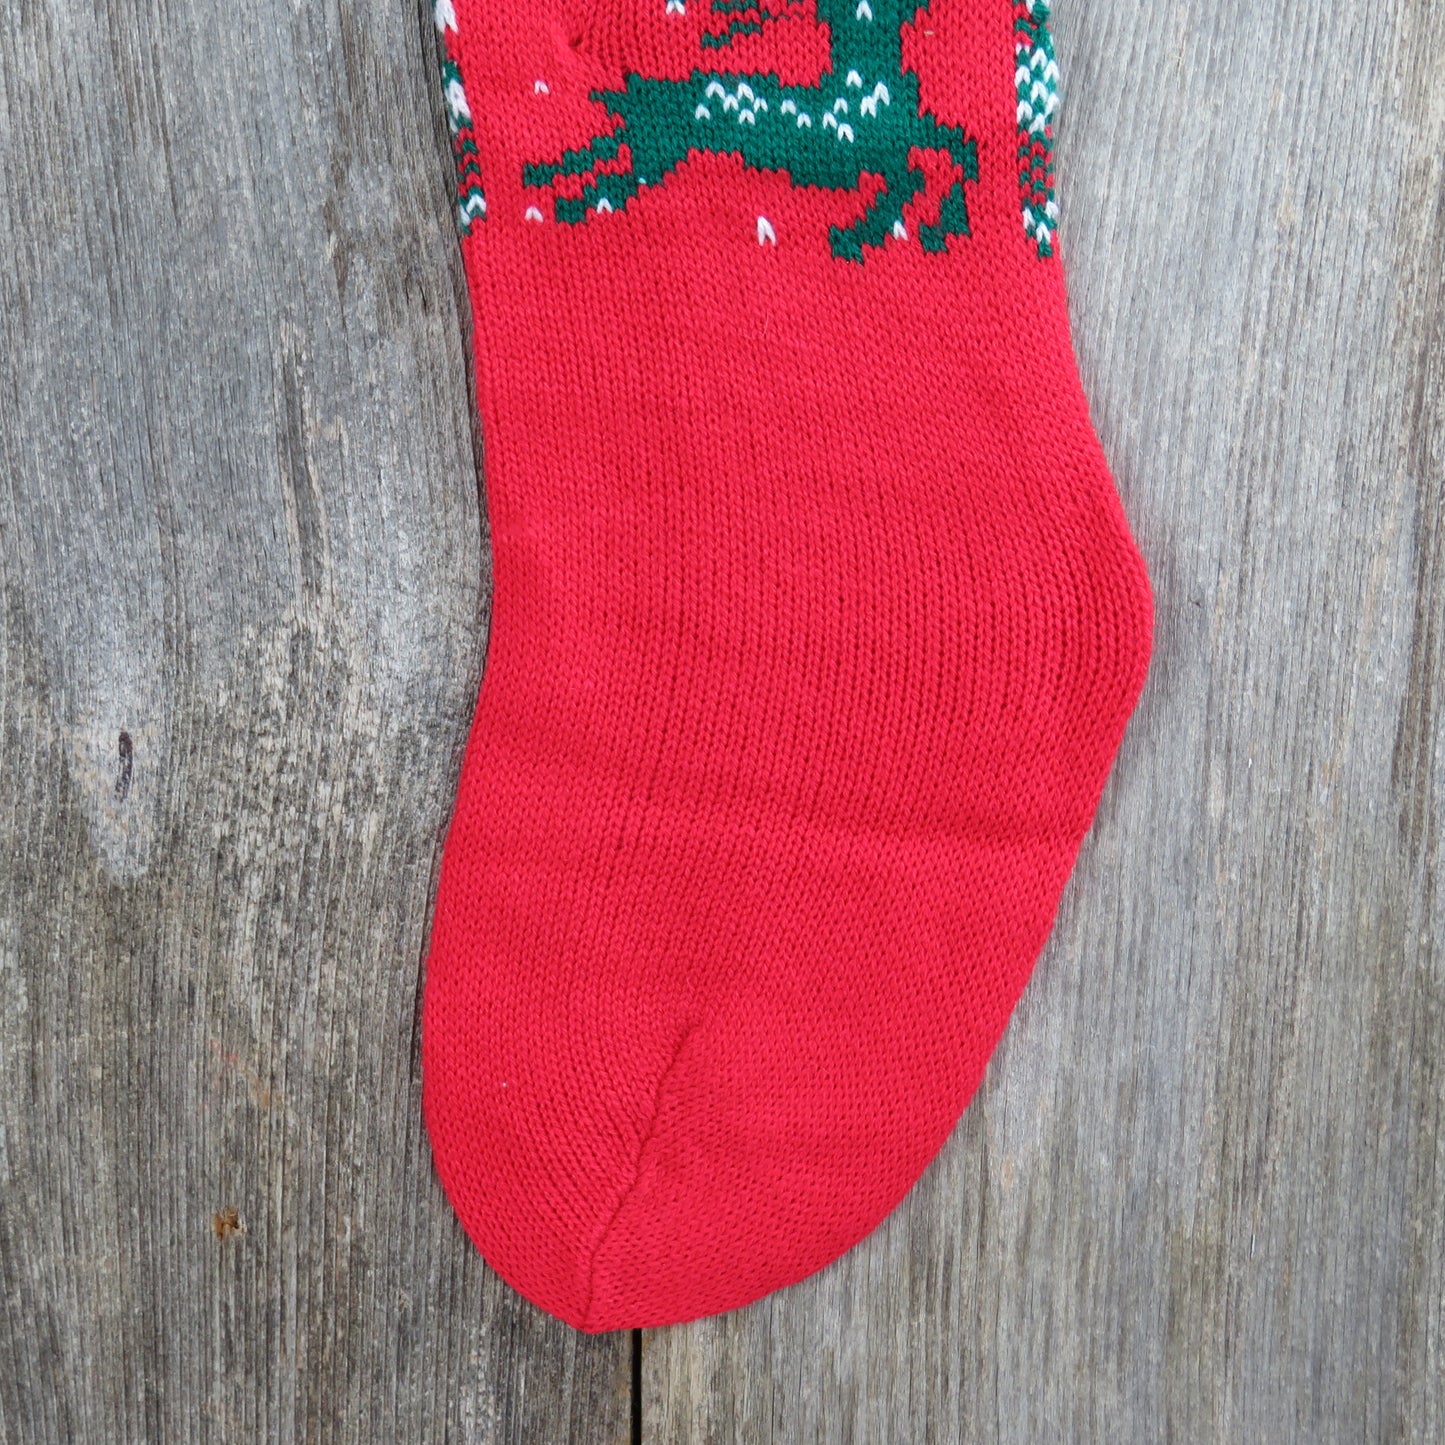 Vintage Reindeer Knit Christmas Stocking Deer Knitted  Red Green White - At Grandma's Table